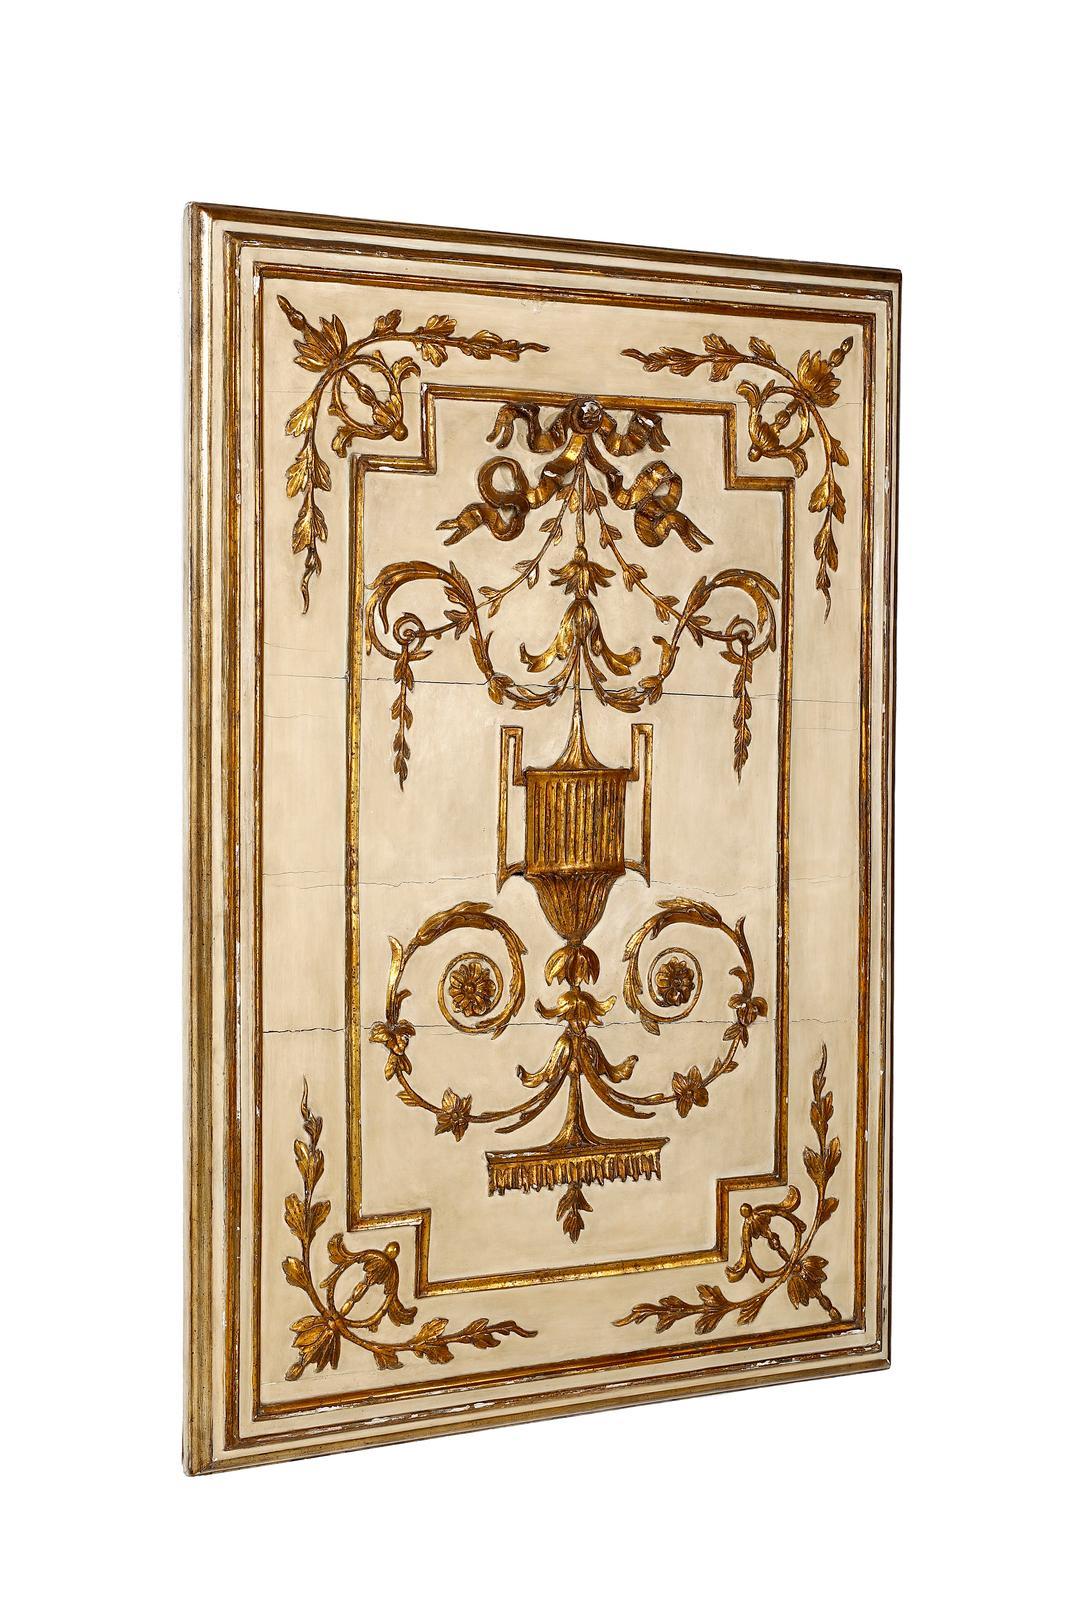 Anonymous
ca. 1790; Italy
Wood panel and plaster, painted, gilt and lacquered

Approximate size: 118.5 x 82.5 x 5 cm

The present panel is probably of late 18th century origin, inspired by the vogue for antiquity during the neo-classical era.